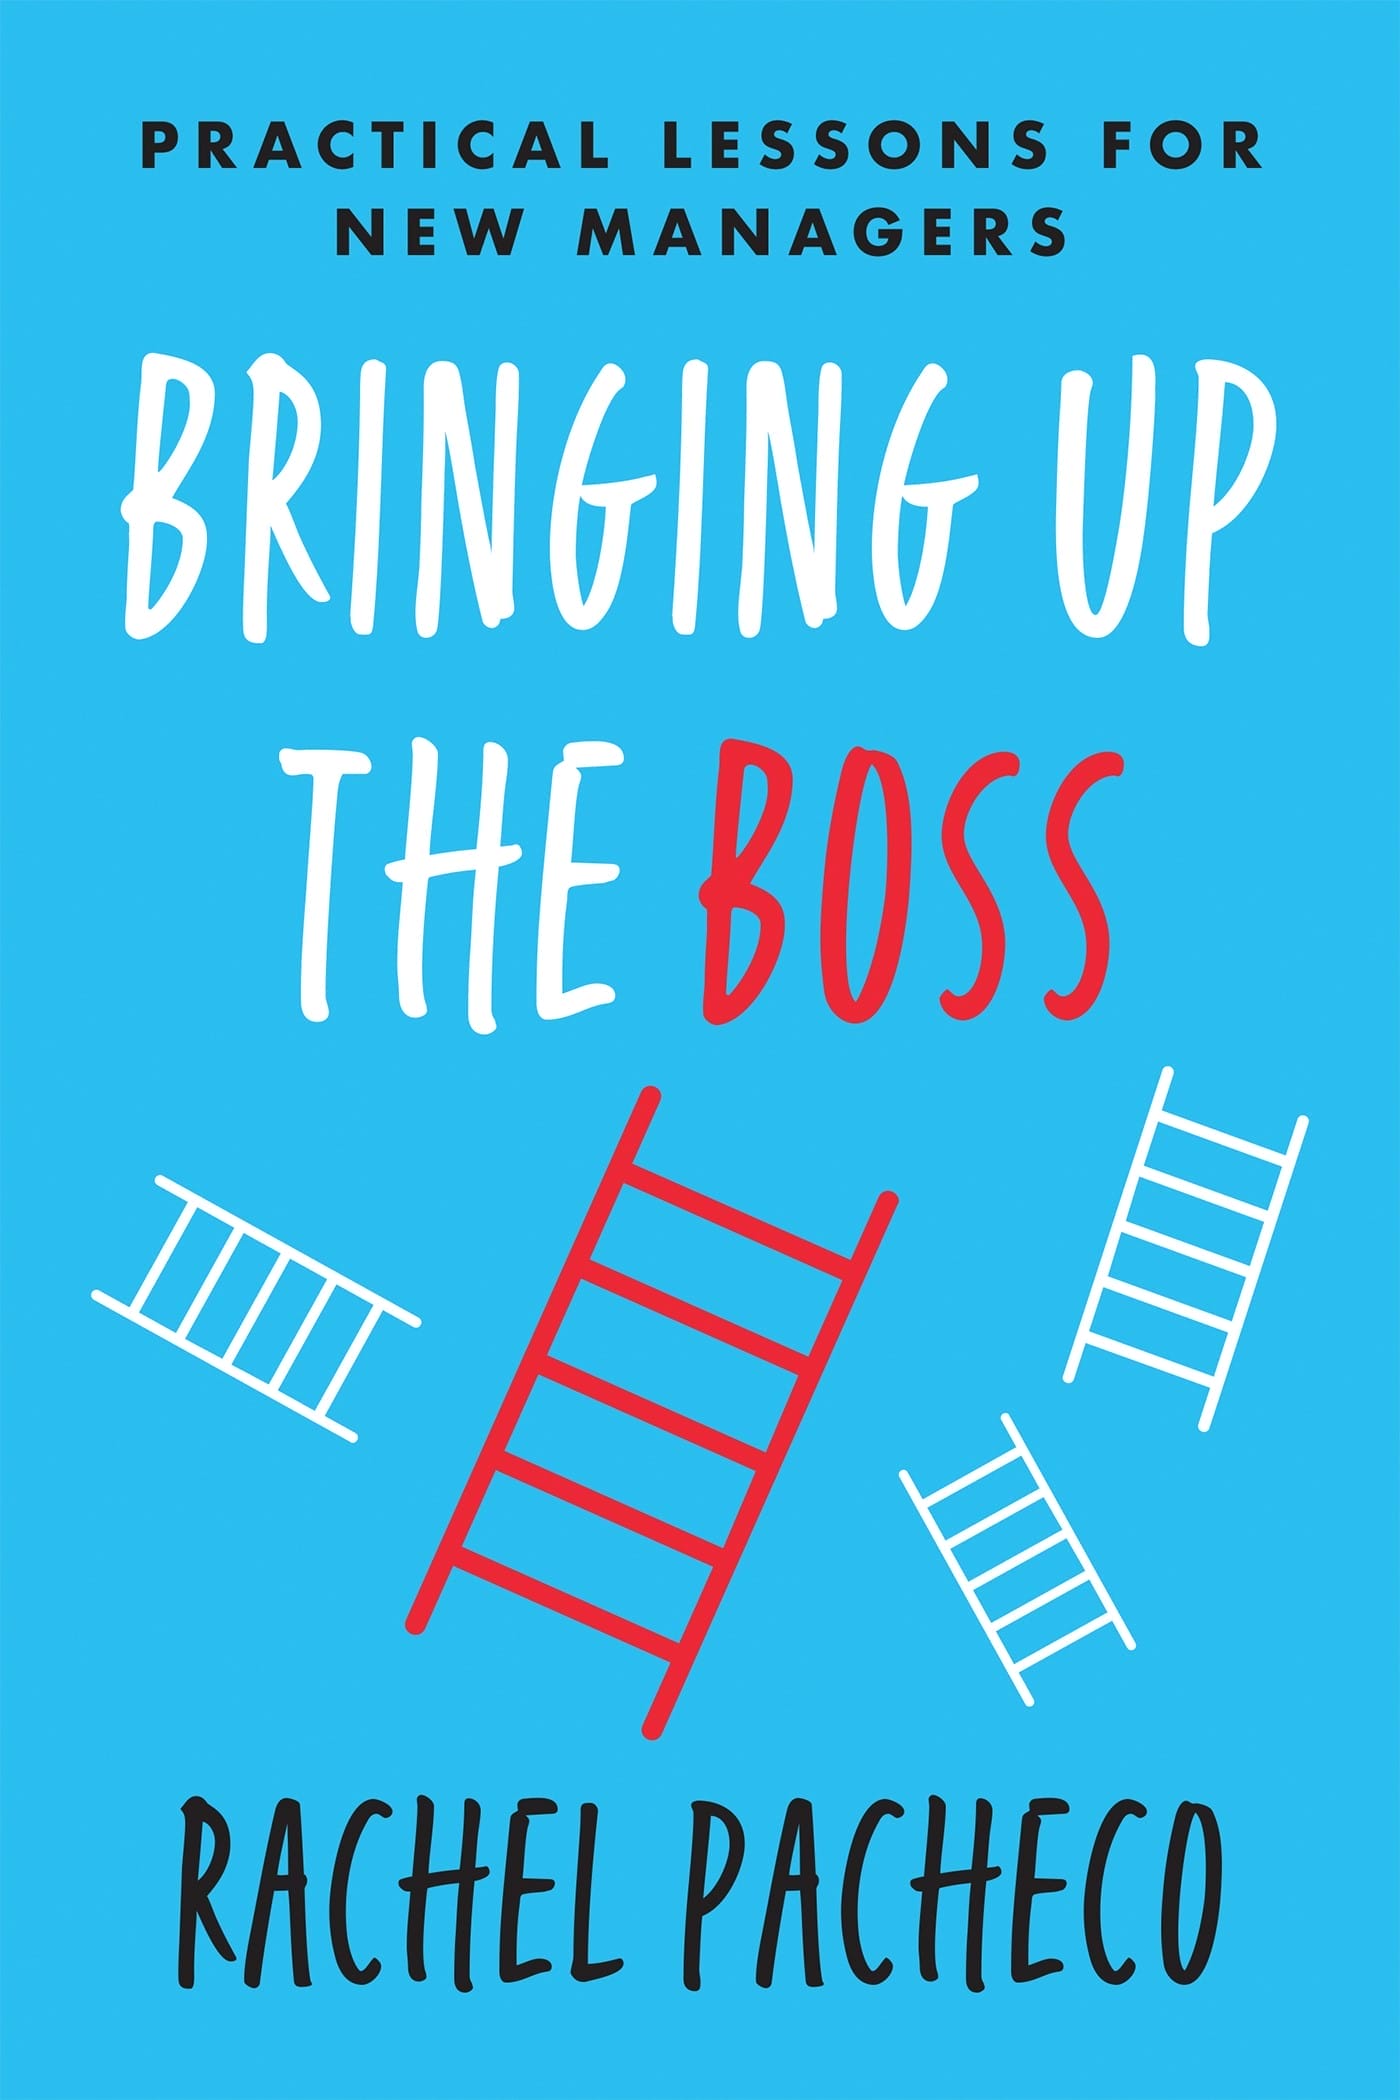 Book titled "Bringing Up the Boss"